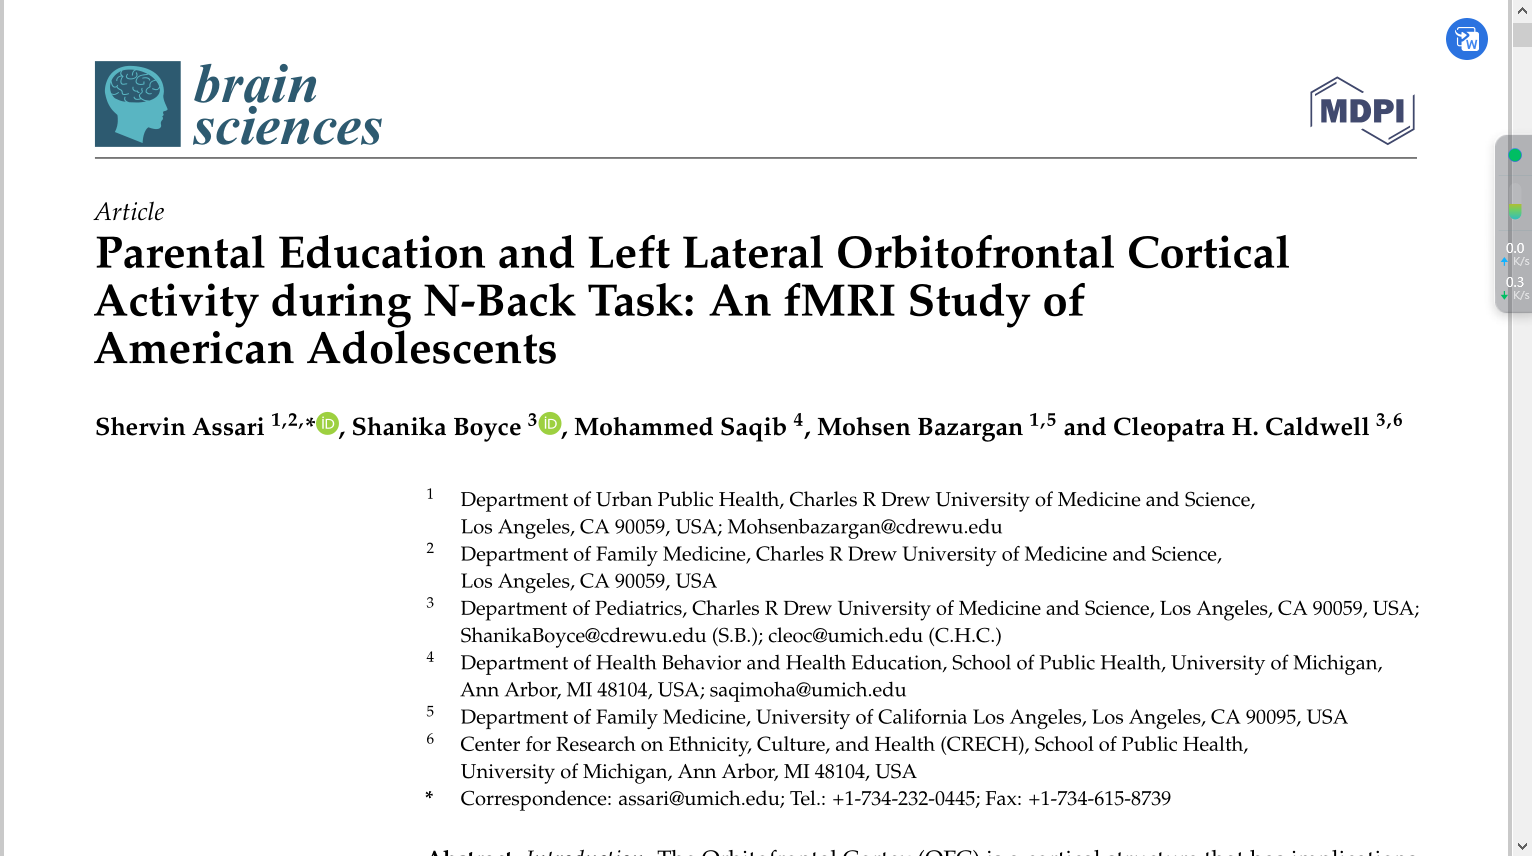 20231212 Parental Education and Left Lateral Orbitofrontal Cortical Activity during N-Back Task: An fMRI Study of American Adolescents